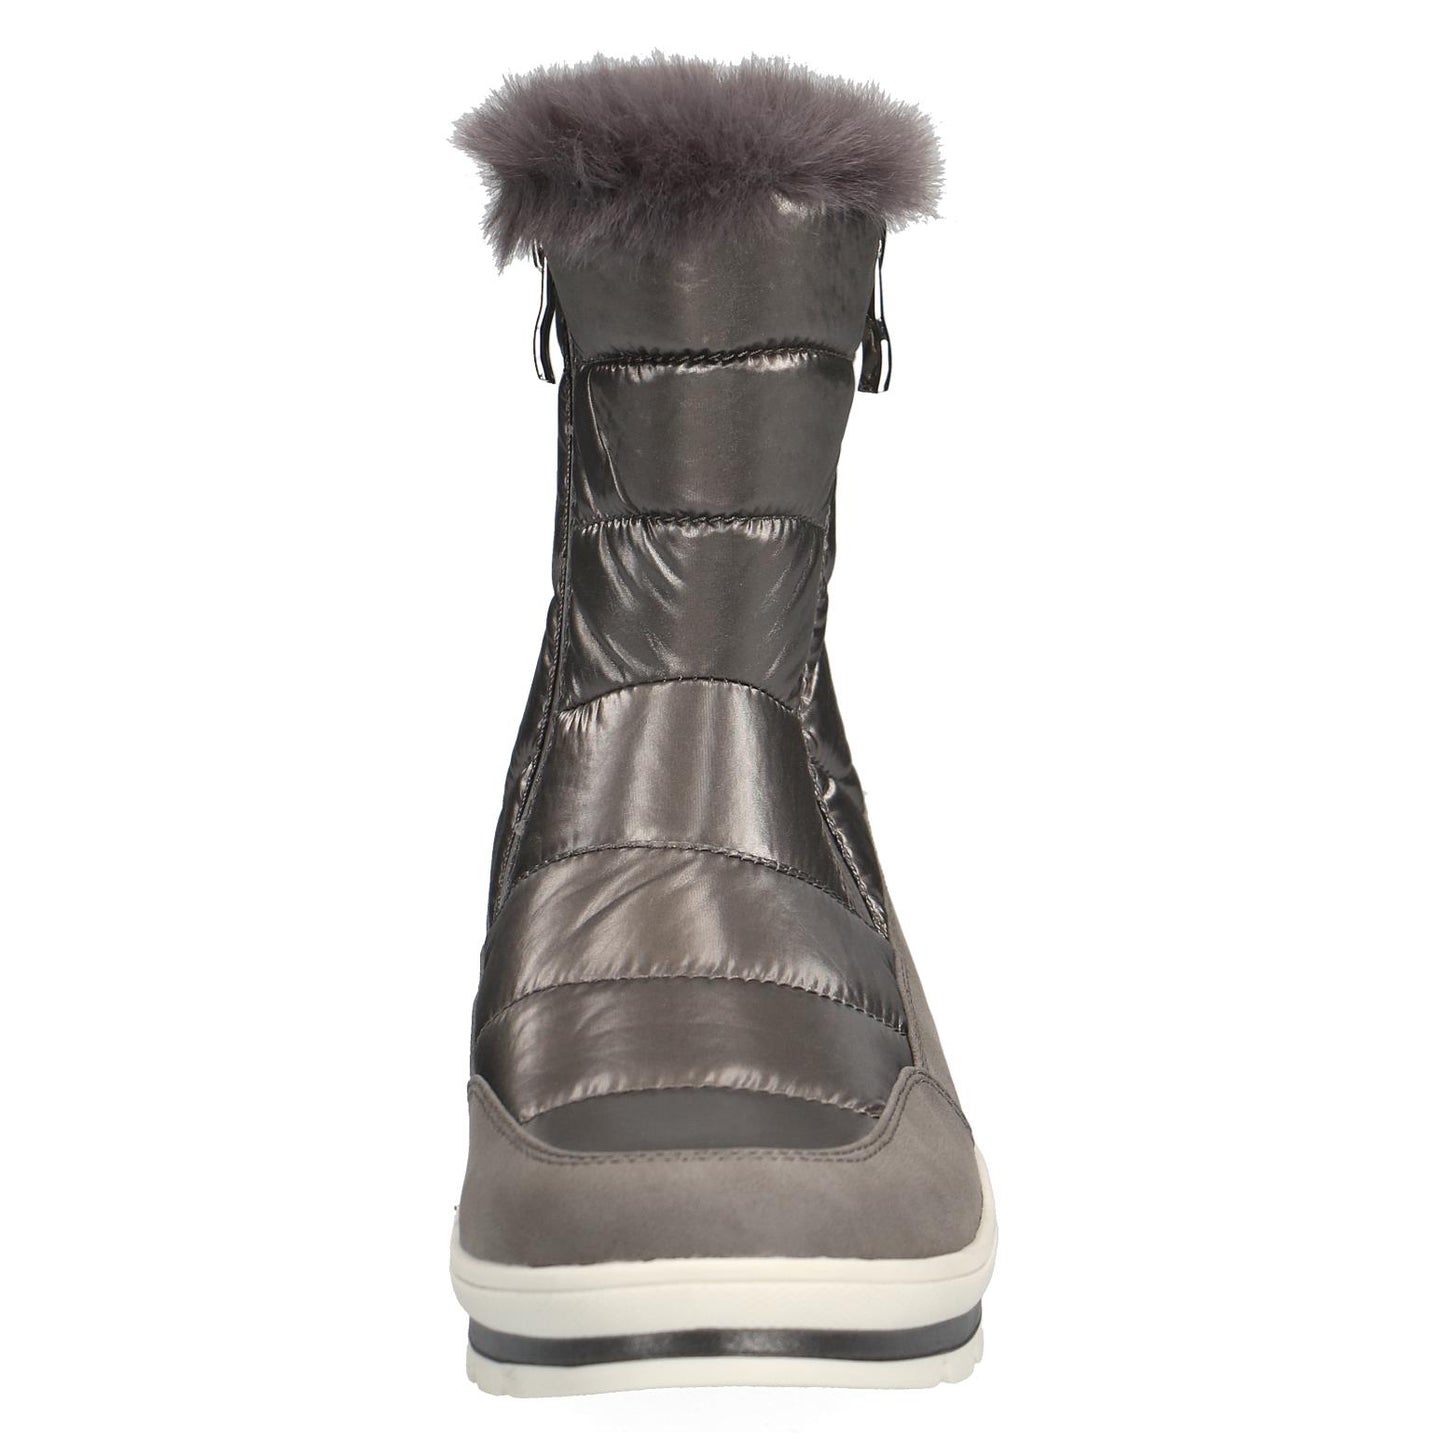 Caprice Holy 26433-29 Womens Snow Boots